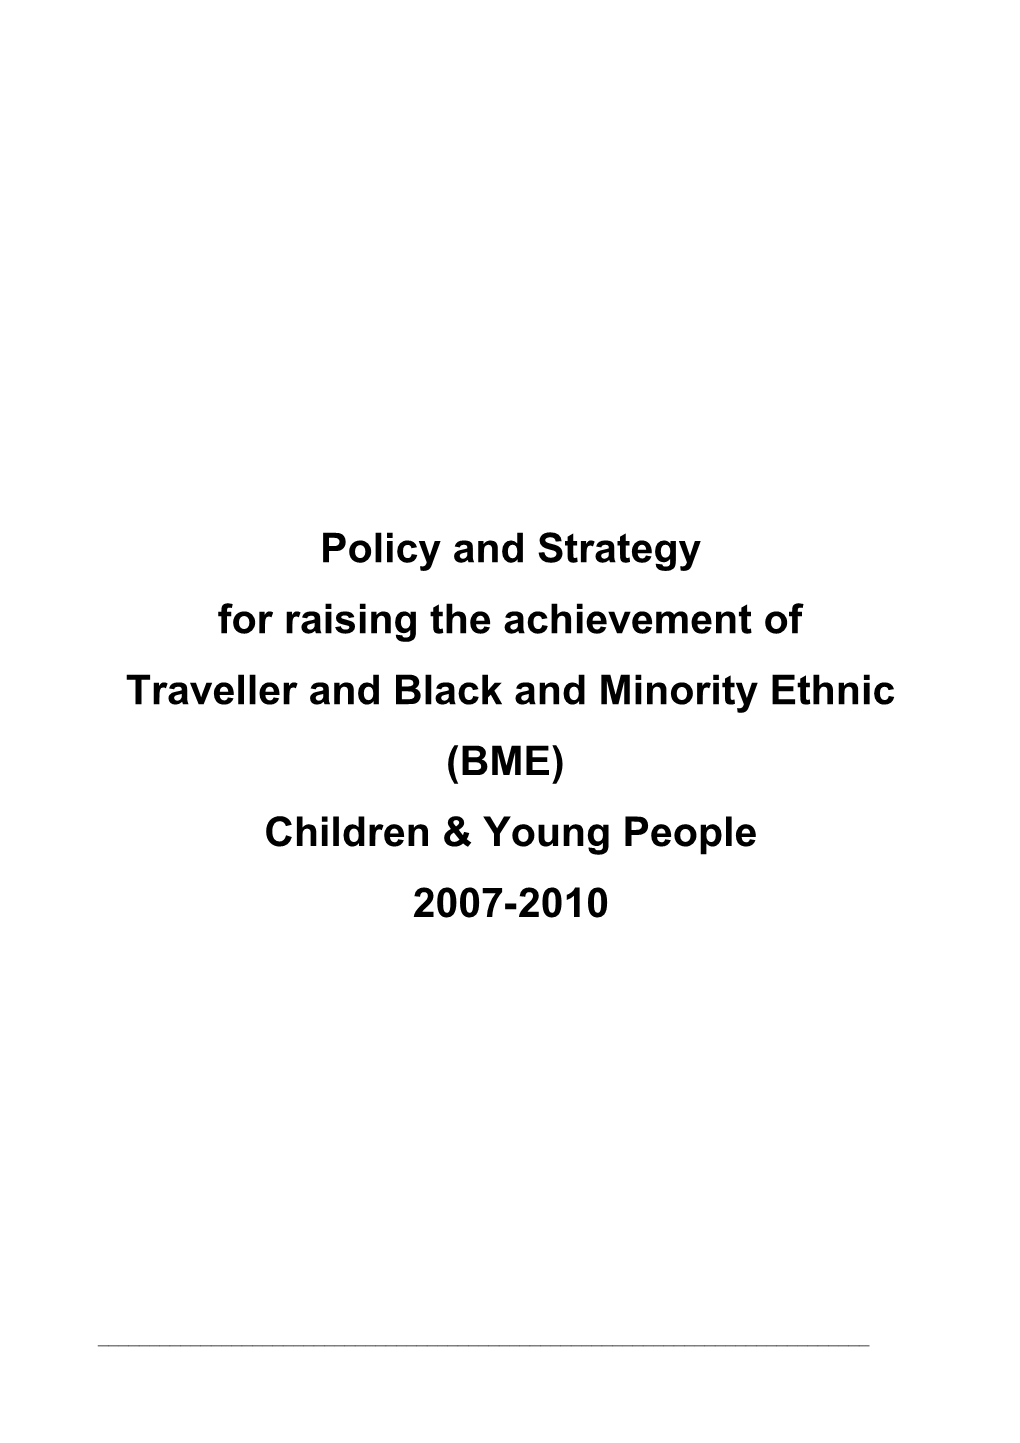 Policy and Strategy for Black and Minority Ethnic Children & Young People Including Travellers